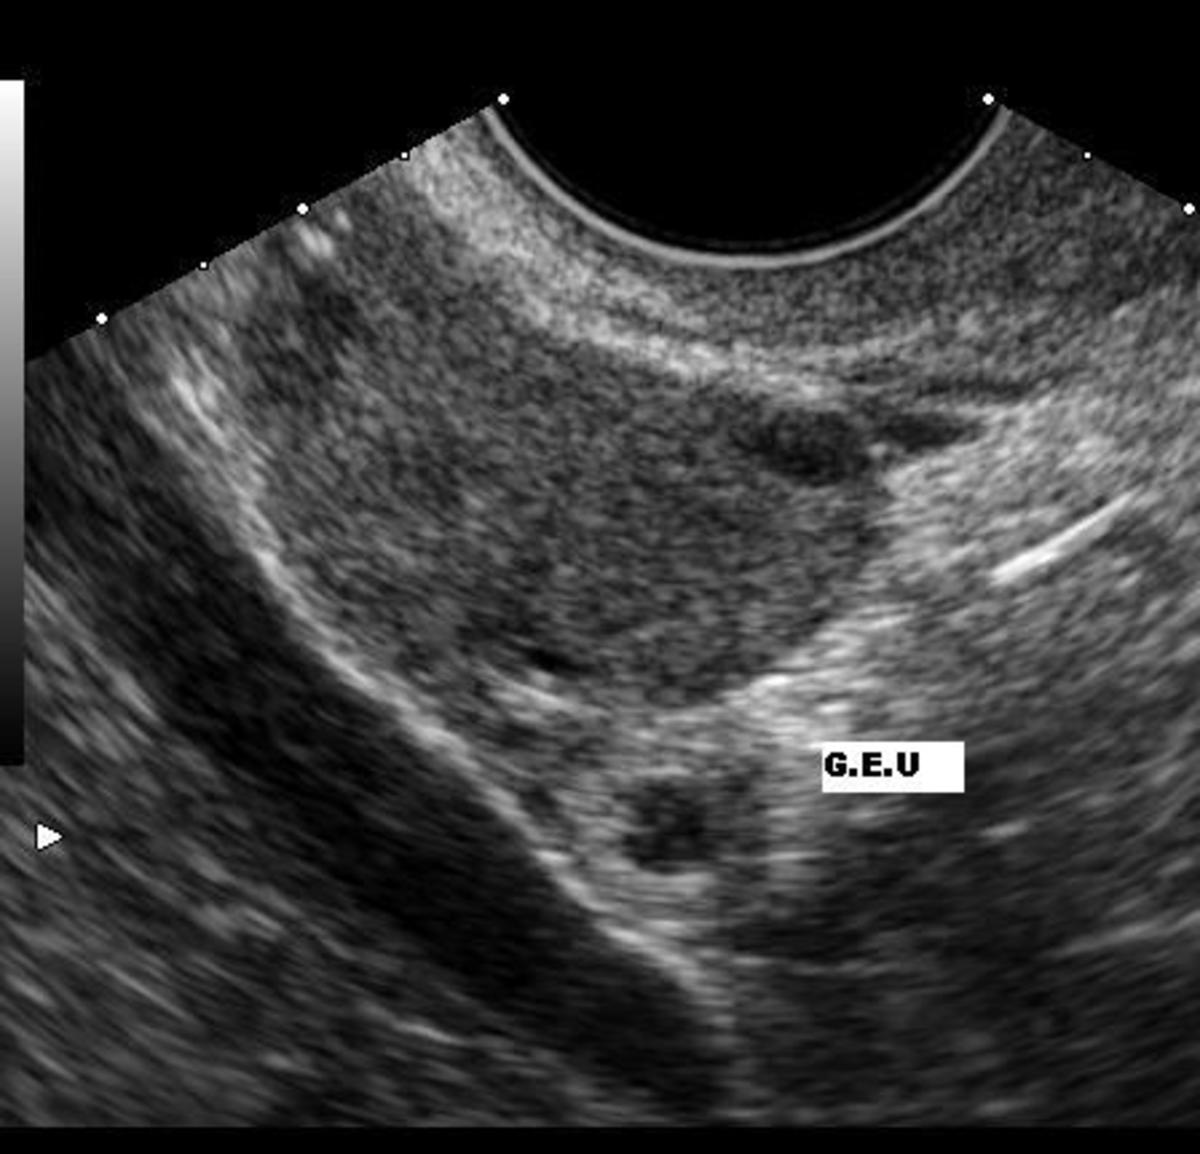 An ectopic pregnancy observed by ultrasound examination.